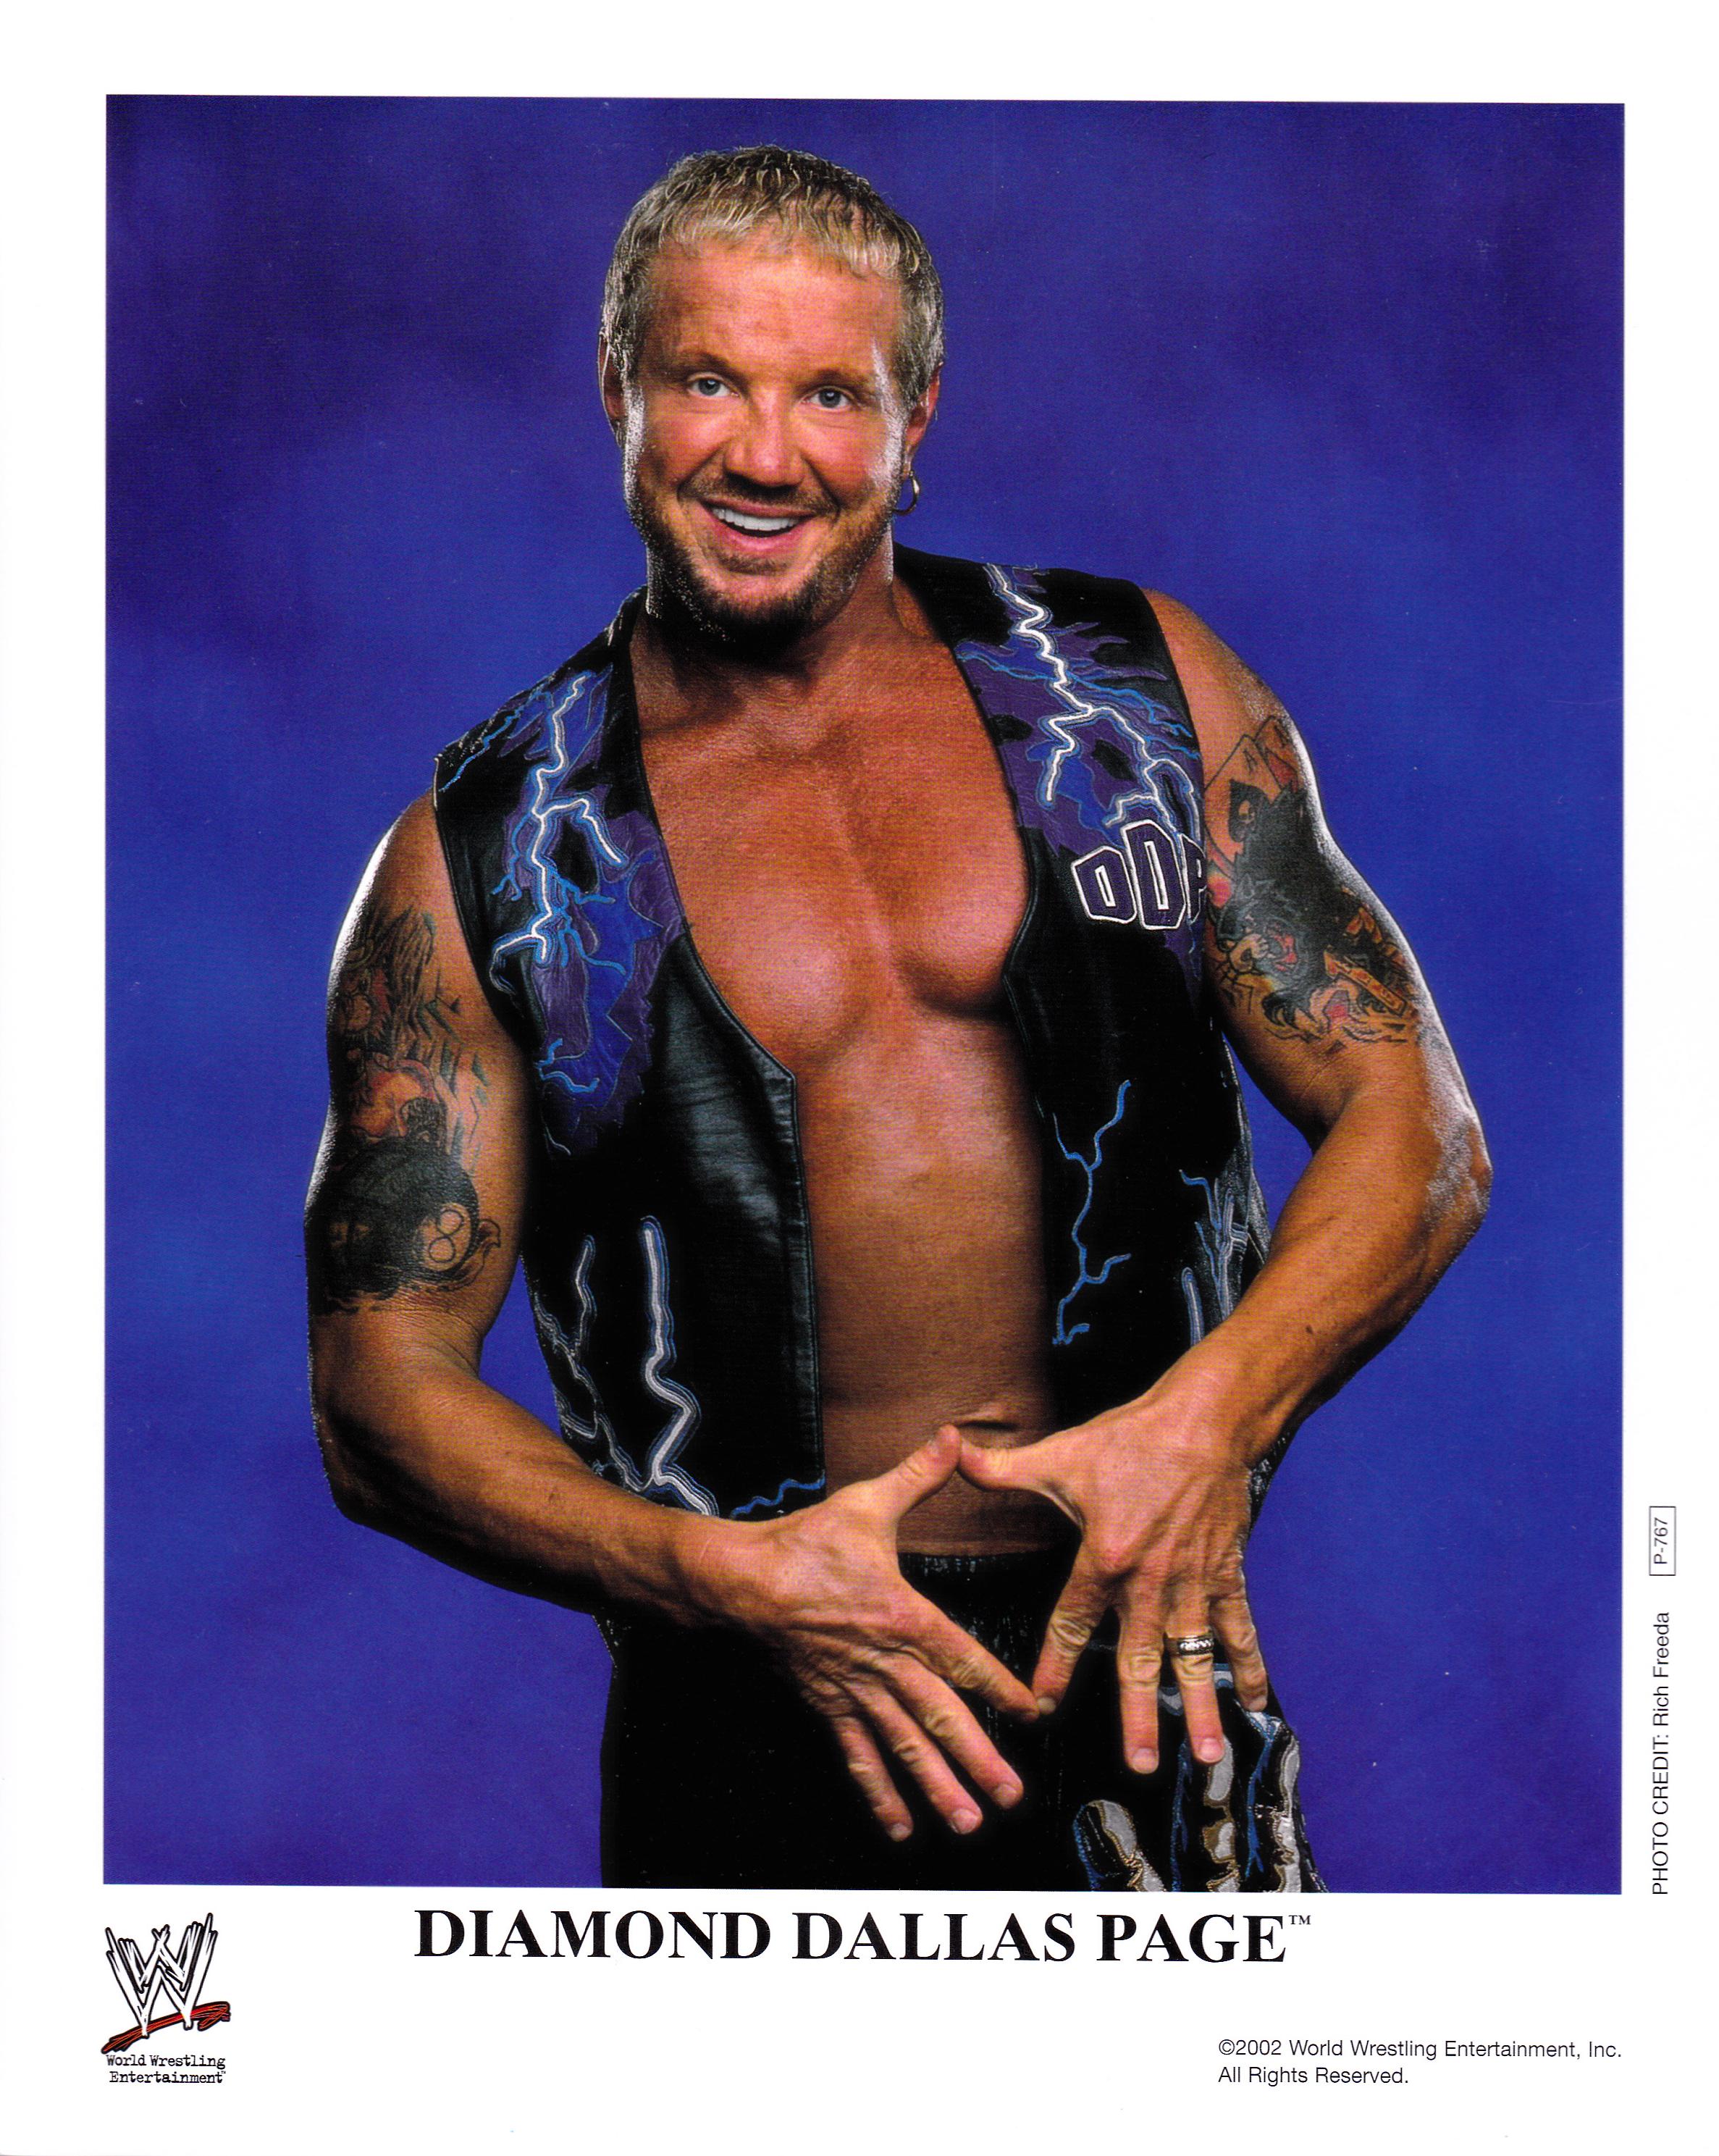 http://photos.imageevent.com/sharpshootercollectibles/wwewwfpromophotos/Diamond%20Dallas%20Page%20P-767.jpg